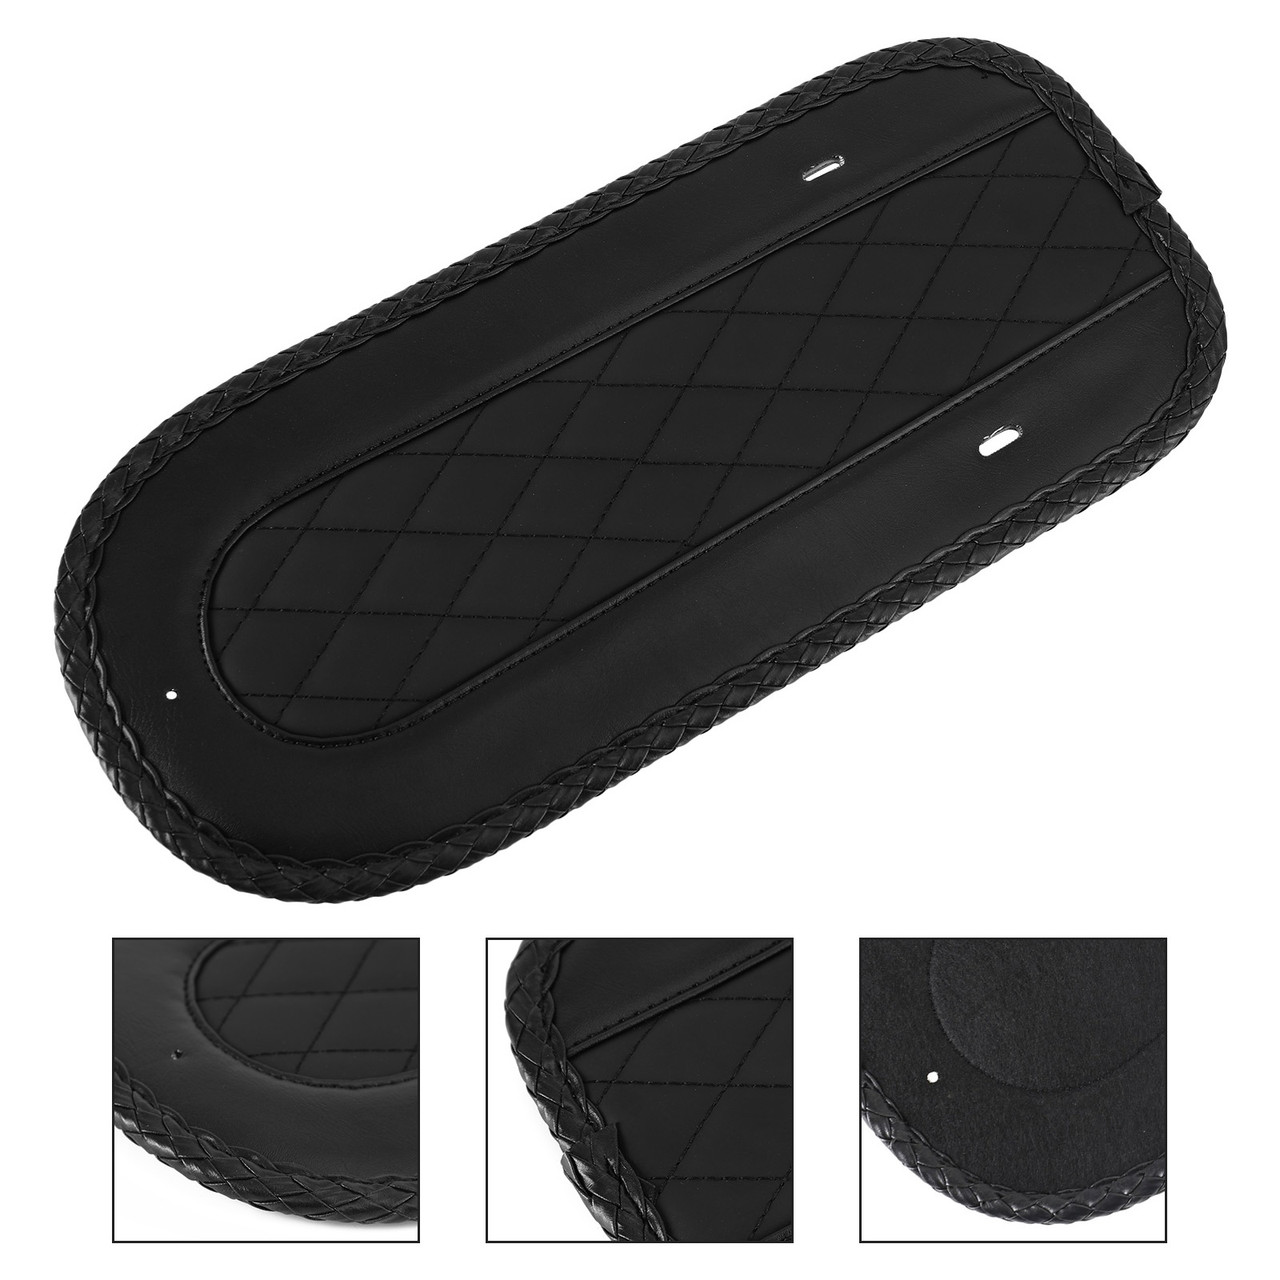 Rear Fender Bib PU Leather Fit For Harley Touring 2008-2021 BLK